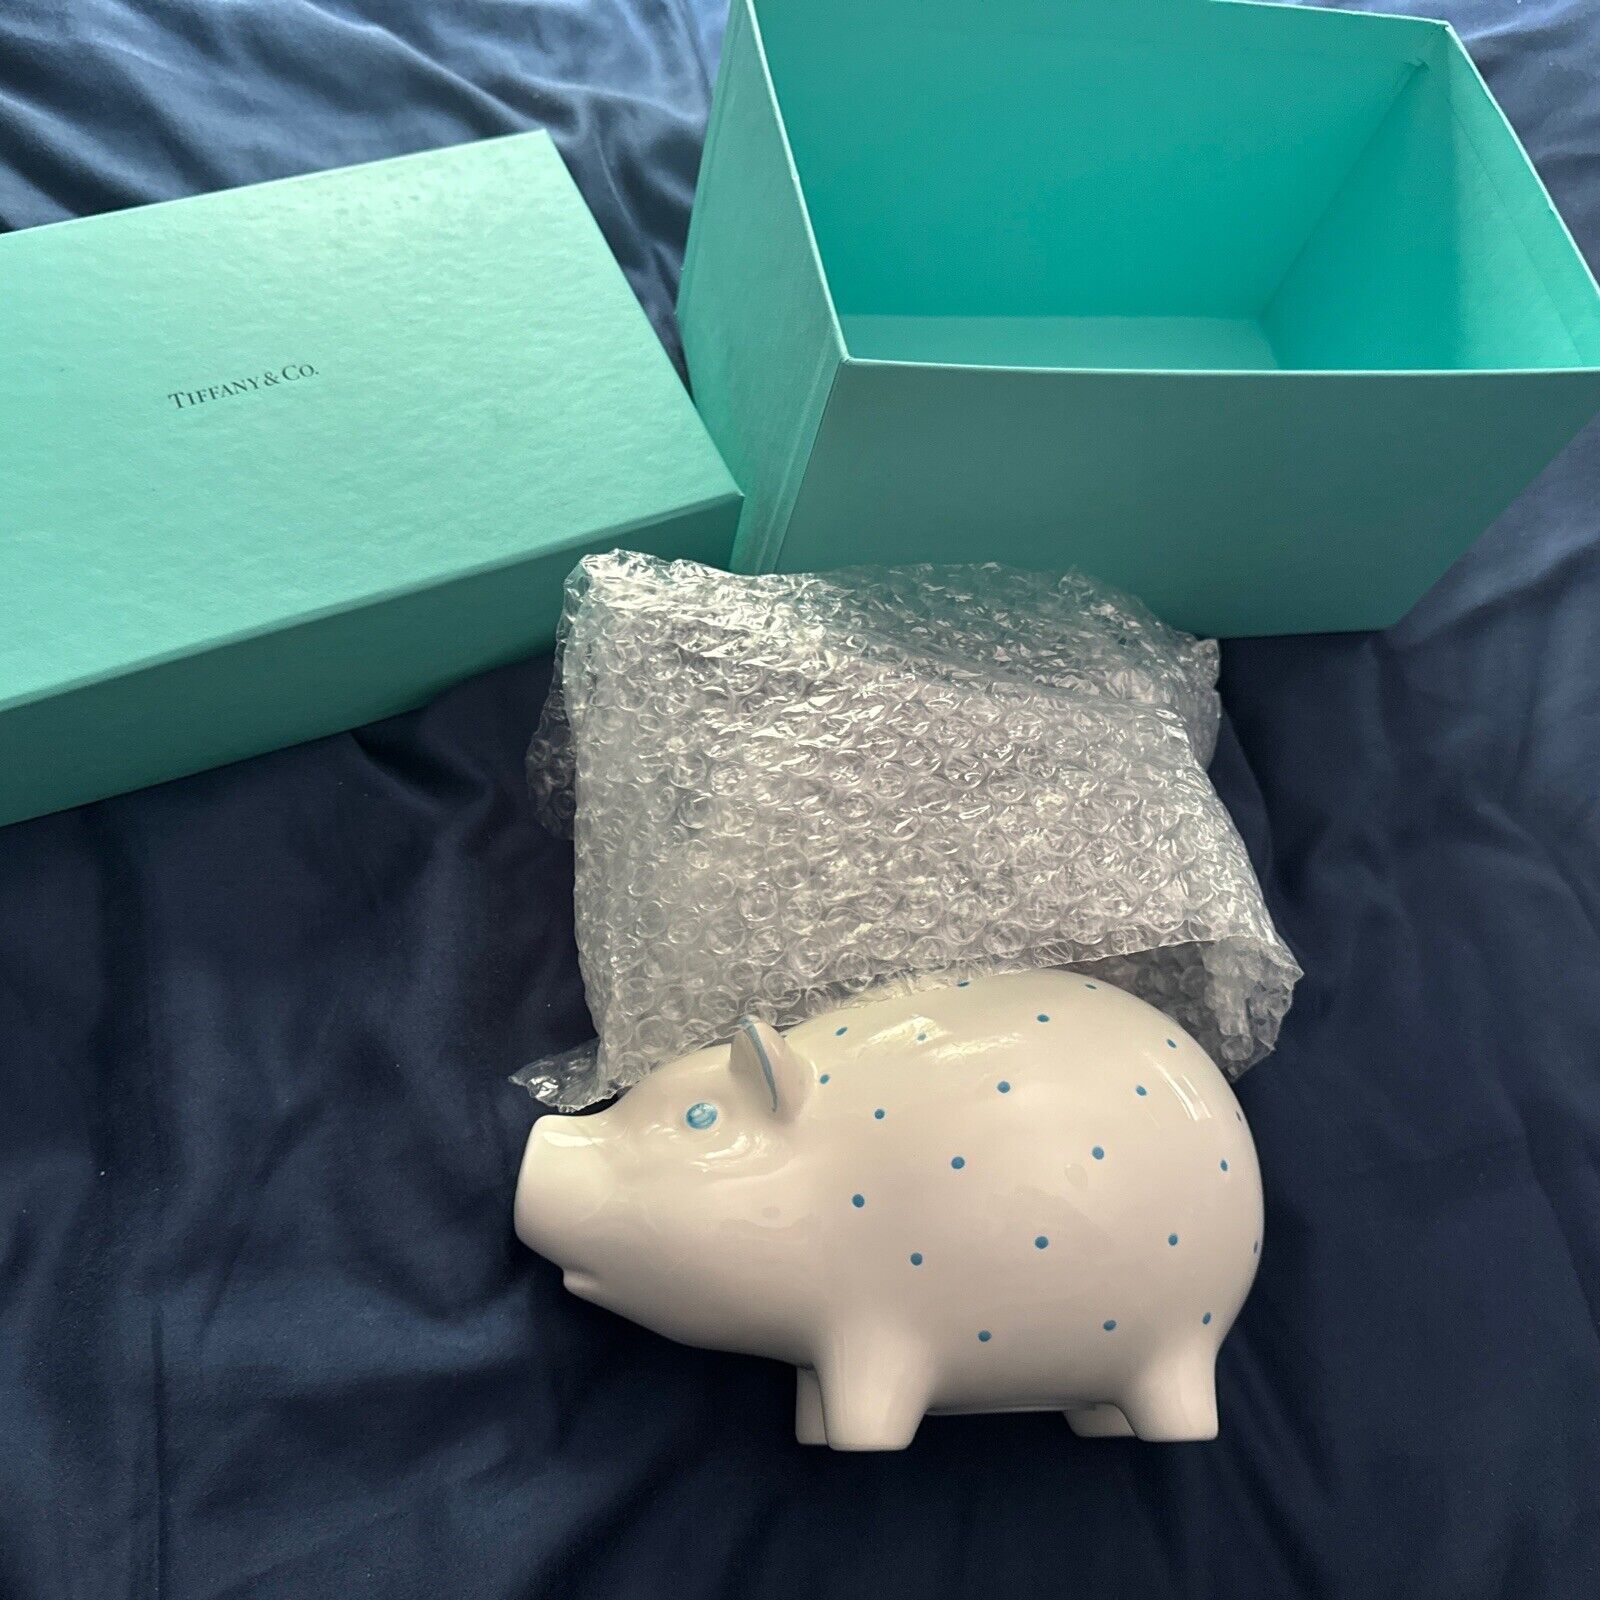 Tiffany & Co Ceramic Piggy Bank White With Blue Dots Baby Gift NEW in Box